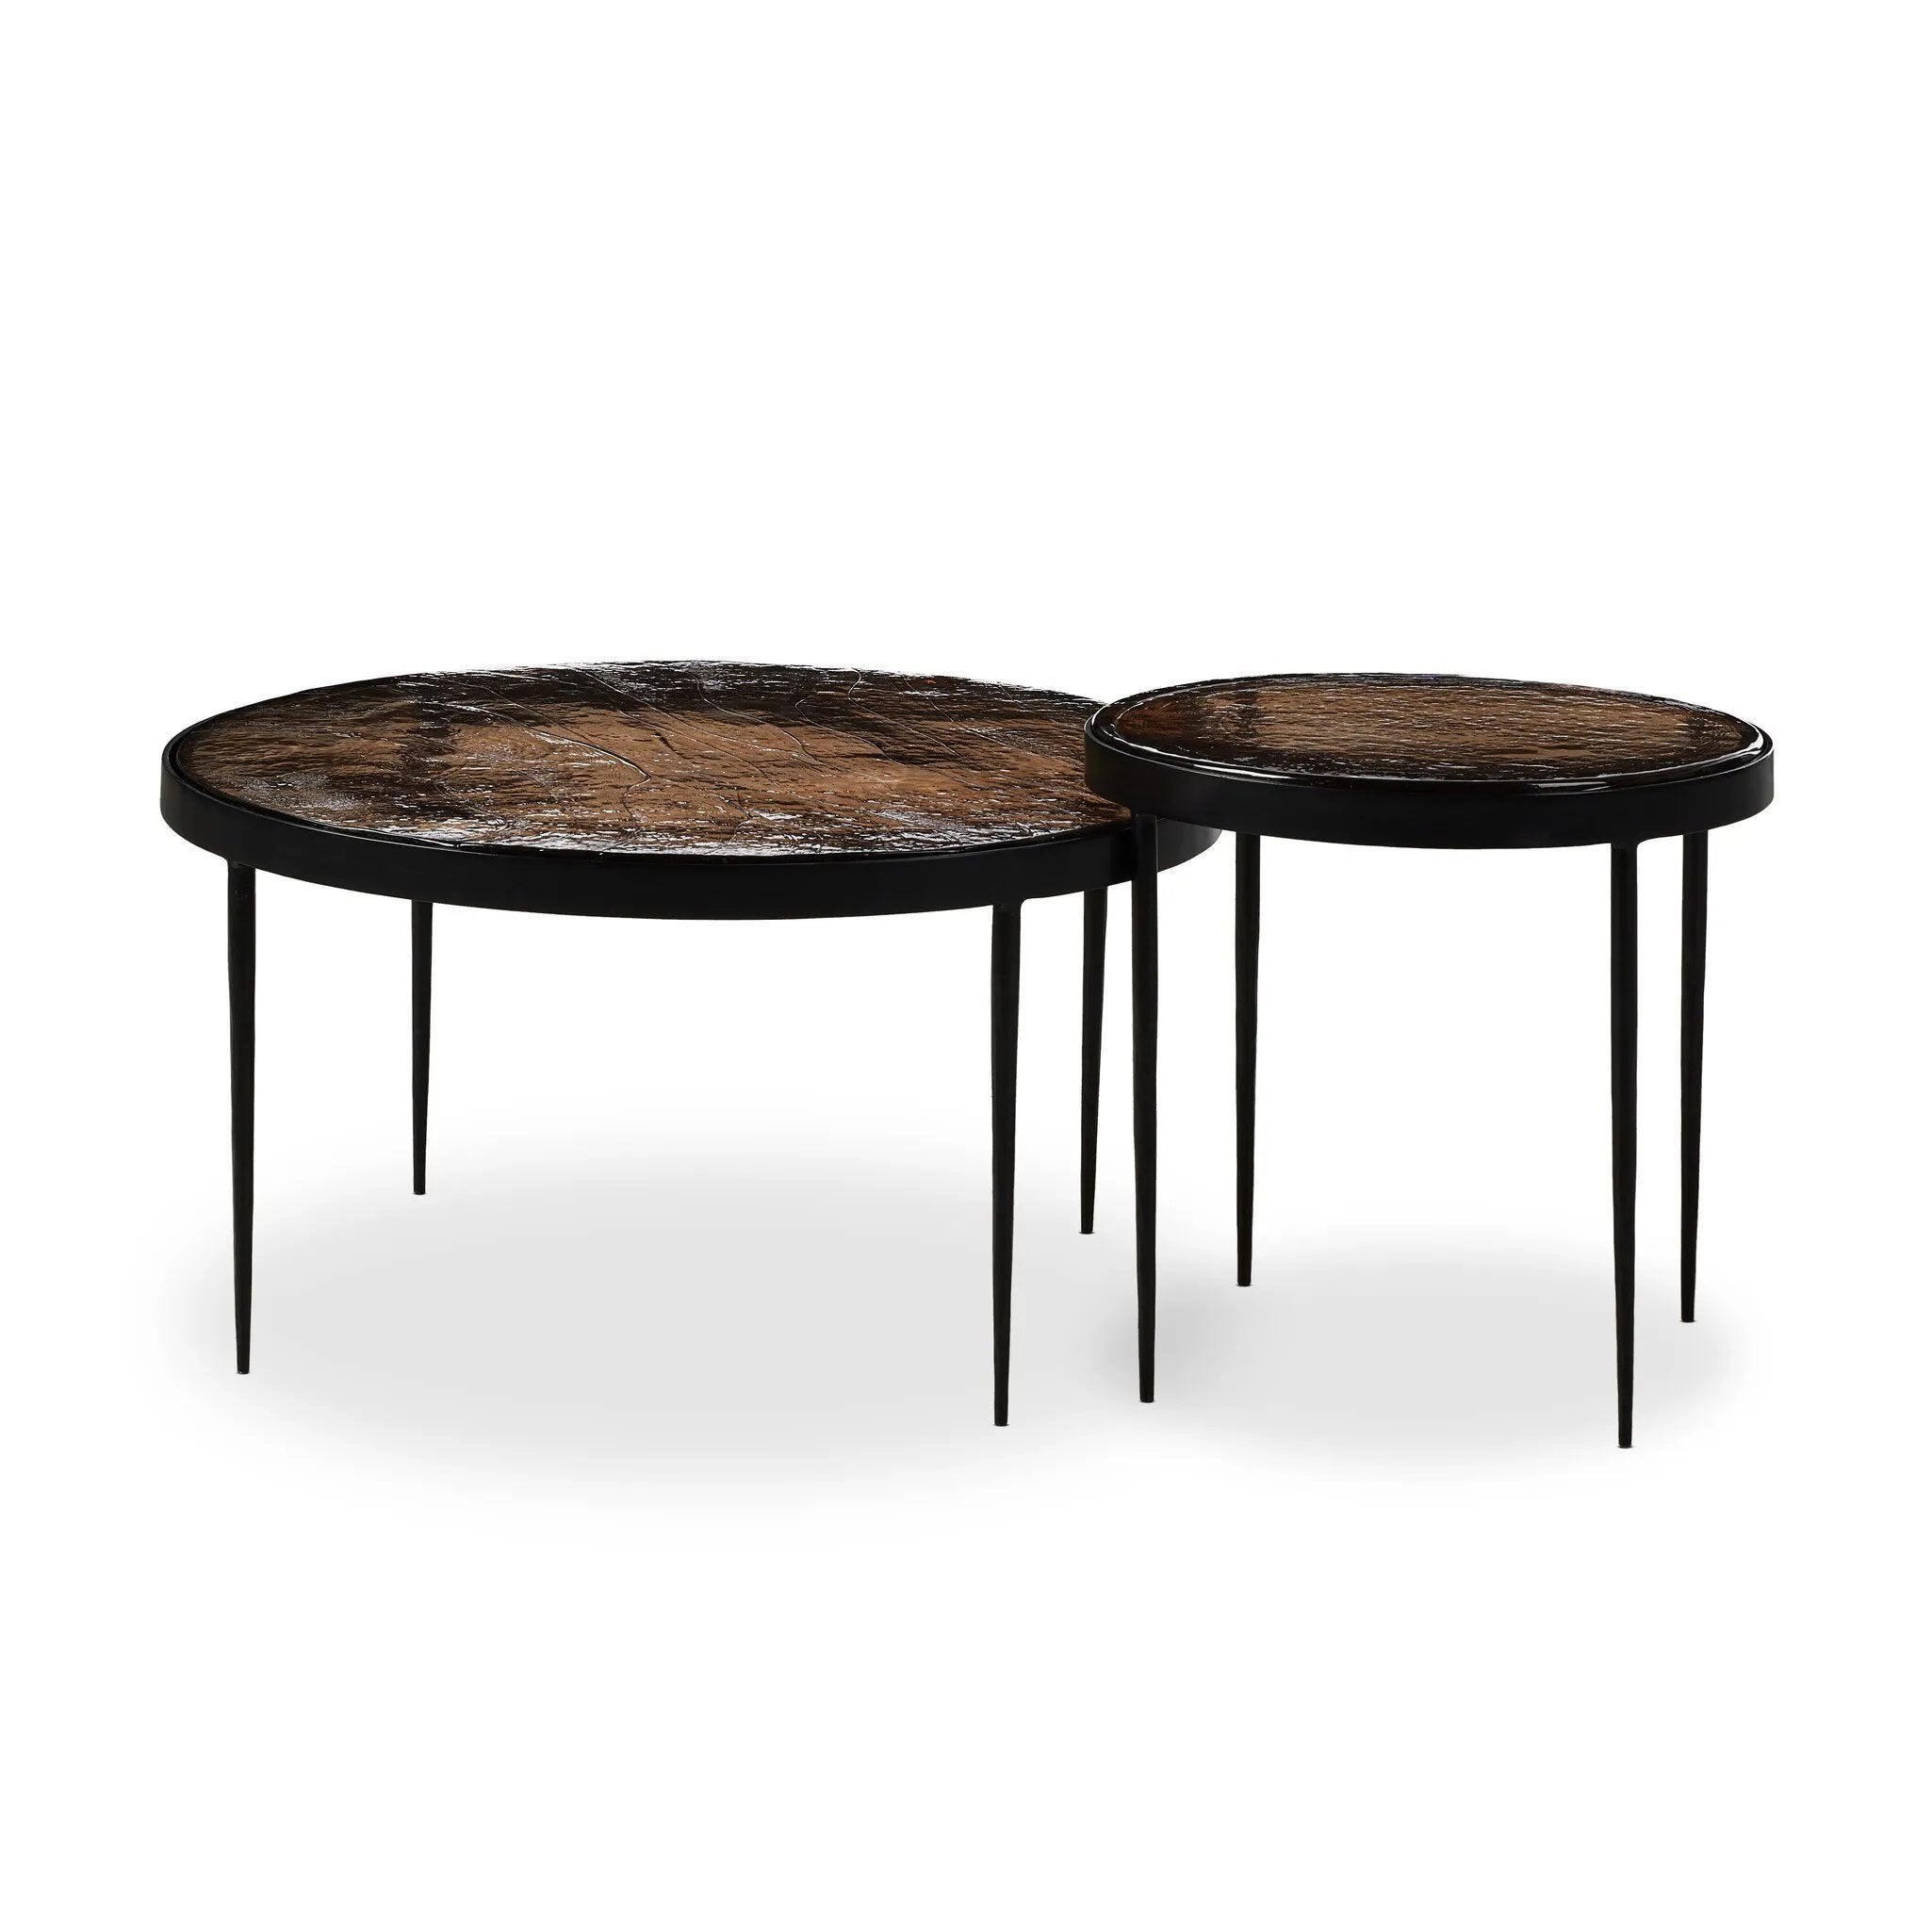 Smoky brown glass tops with slim, tapered matte black metal frames in a sleek, contemporary design. Available as a nesting set or standalone tables.Collection: Marlo Amethyst Home provides interior design, new home construction design consulting, vintage area rugs, and lighting in the Park City metro area.